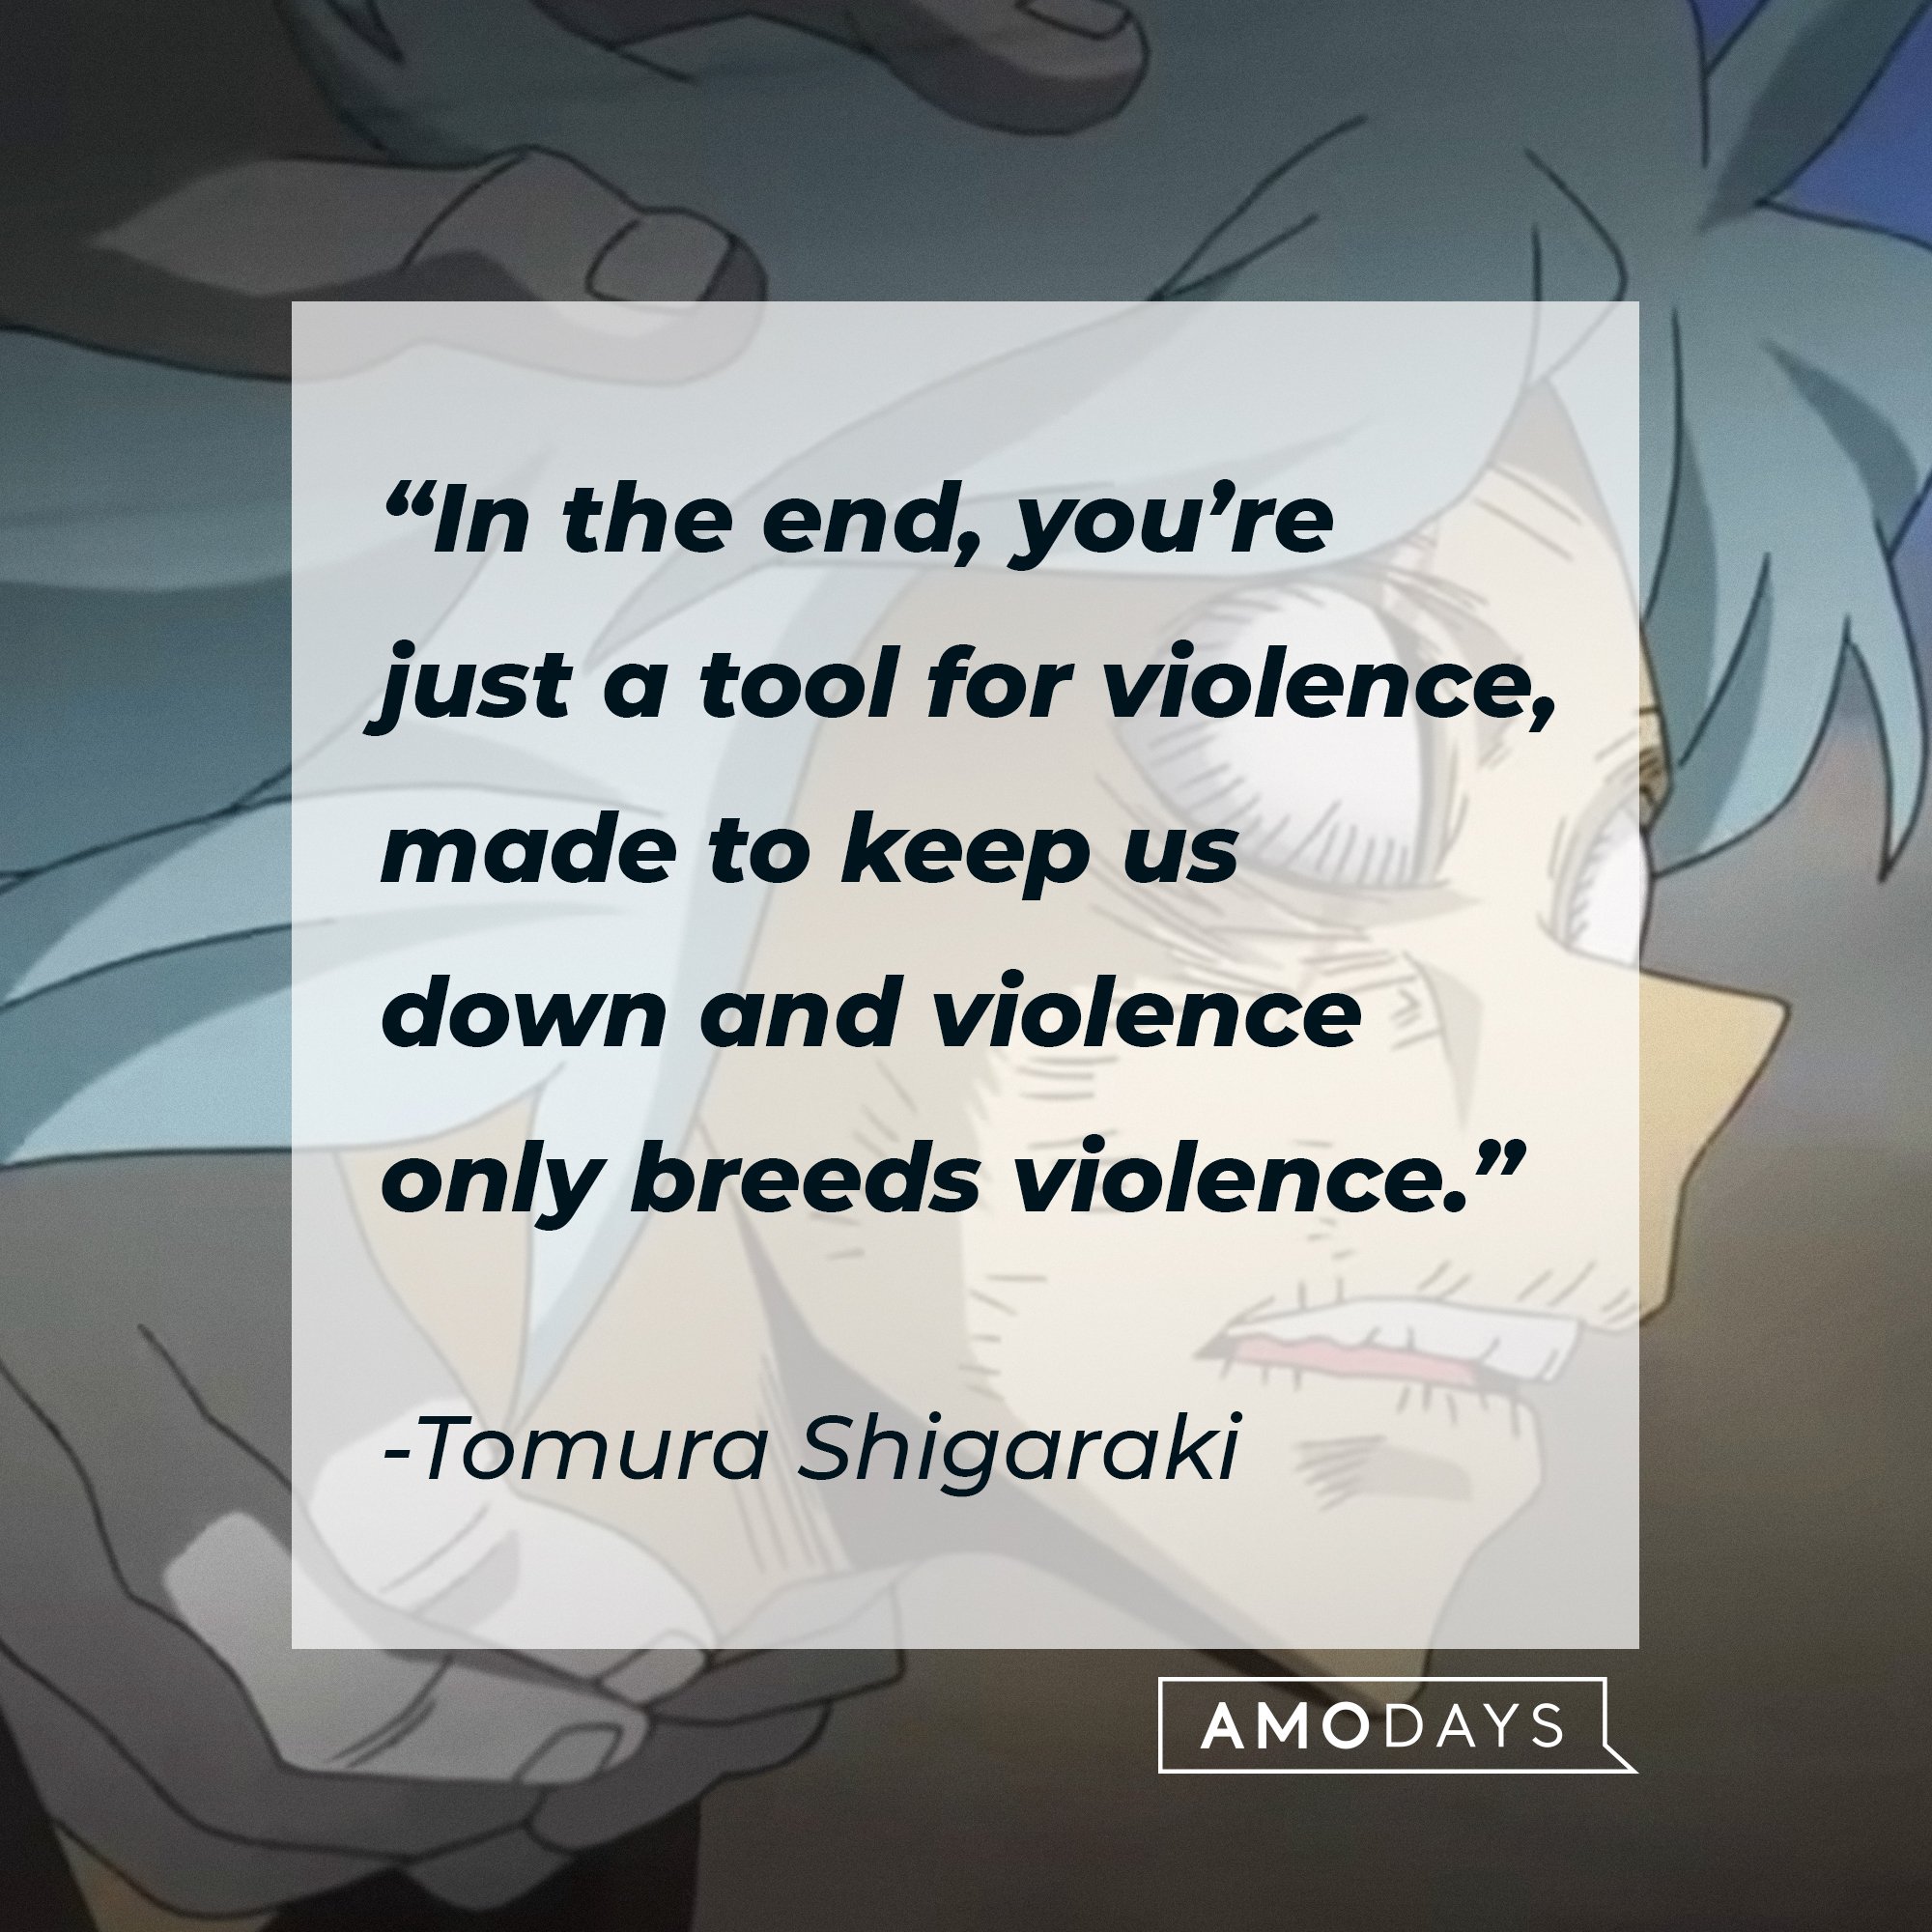 Tomura Shigaraki’s quote: “In the end, you’re just a tool for violence, made to keep us down, and violence only breeds violence.” | Image: AmoDays